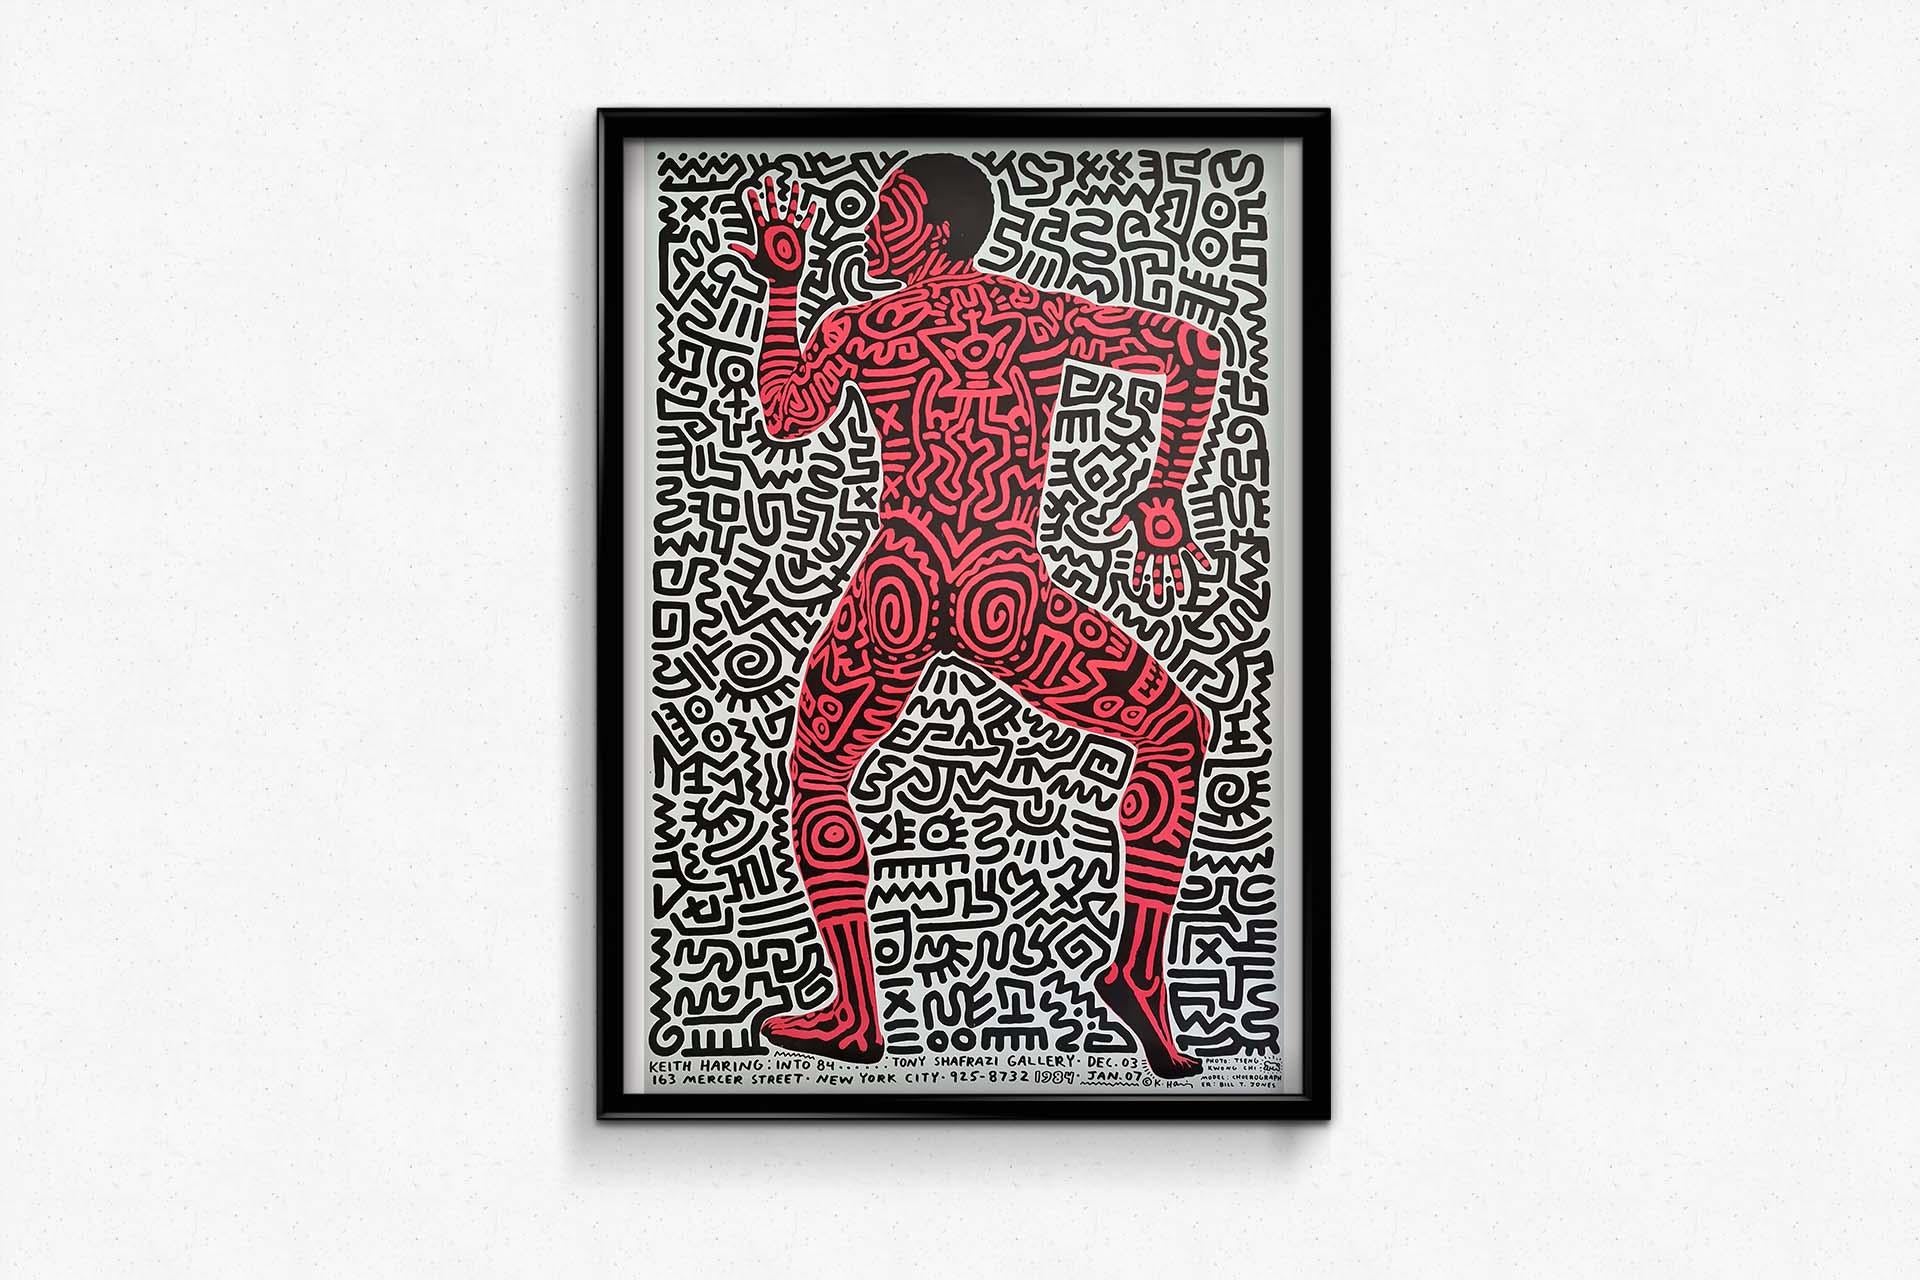 Original poster

Exhibition - Pop art

Bridging the gap between the art world and the street, Keith Haring made a name for himself in the early 1980s with his graffiti drawings in the subways and on the sidewalks of New York City.

Combining the